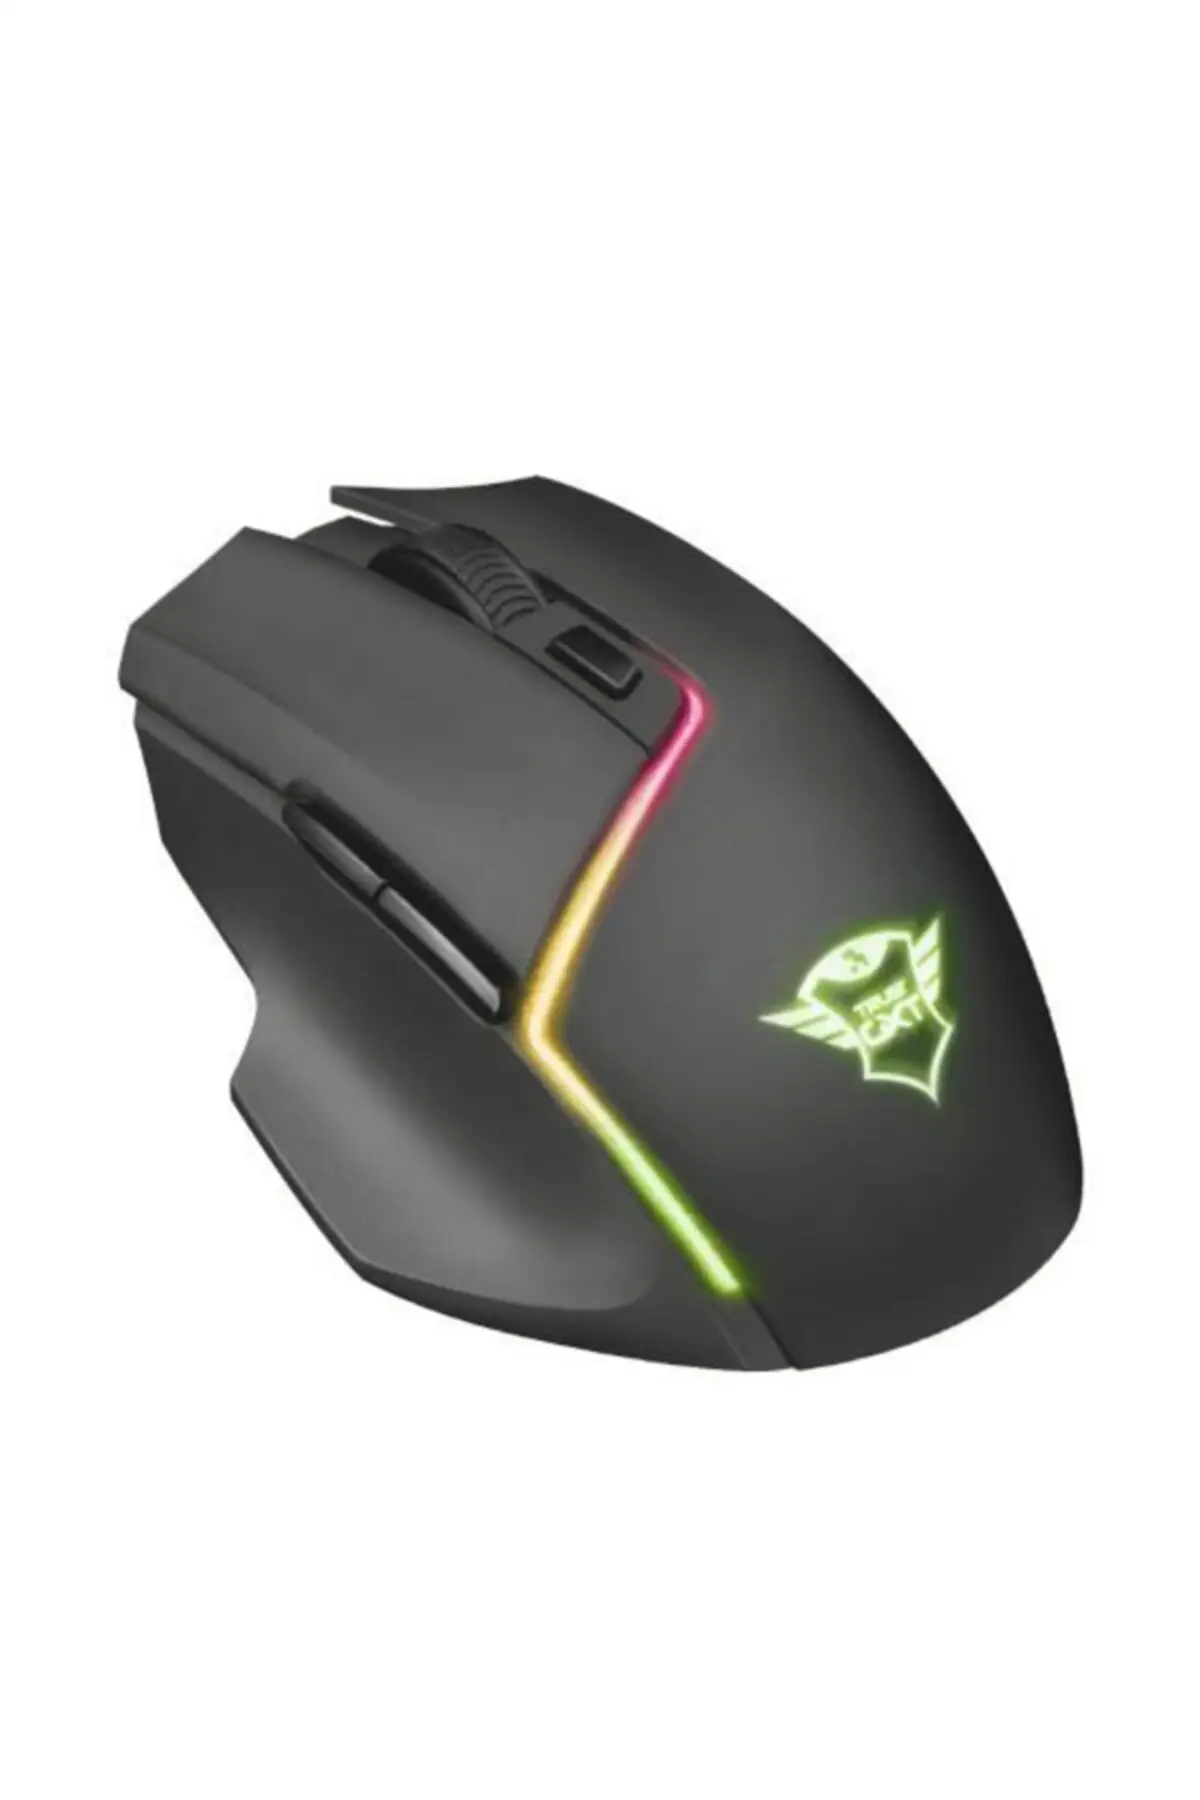 Disan 22210 Usb puss dpi Black Gxt Rechargeable Rgb Wireless Gaming Mouse